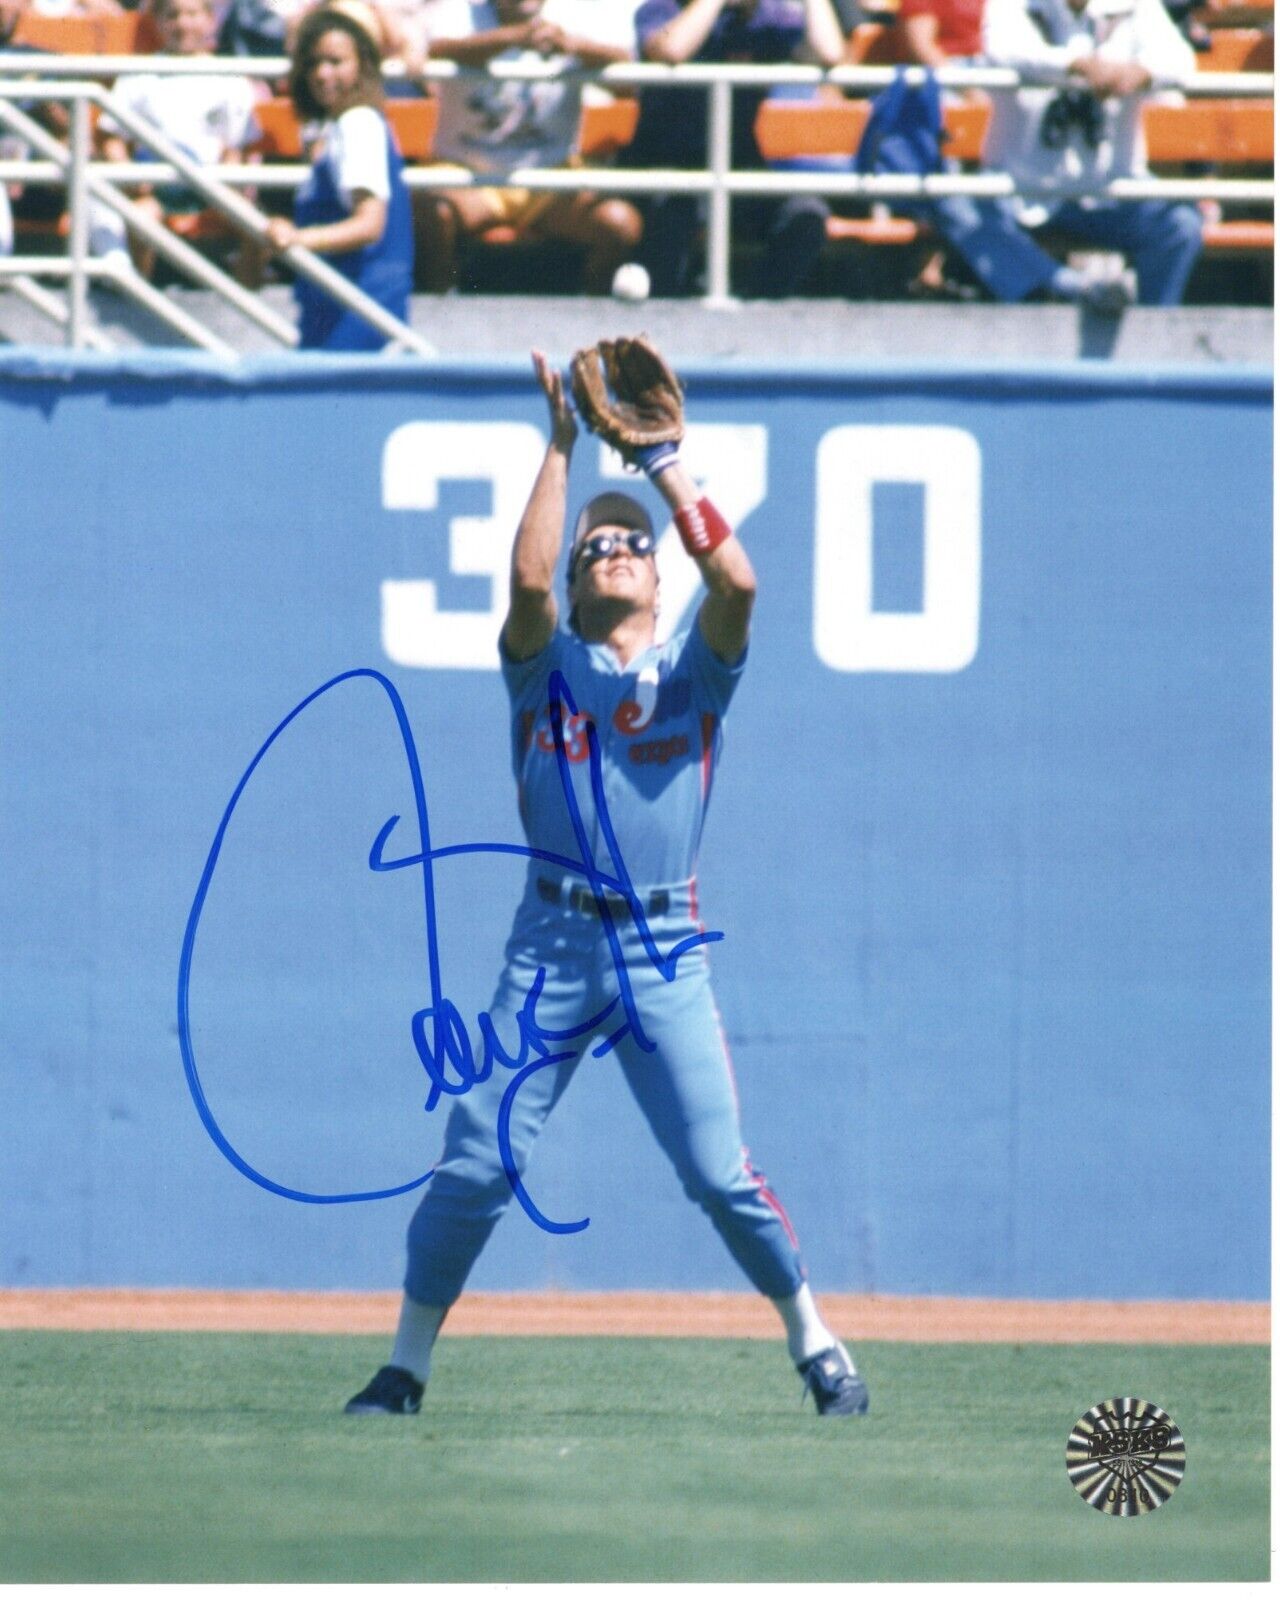 Larry Walker Autographed Baseball 8x10 Photo (Montreal Expos) - 643-collectibles